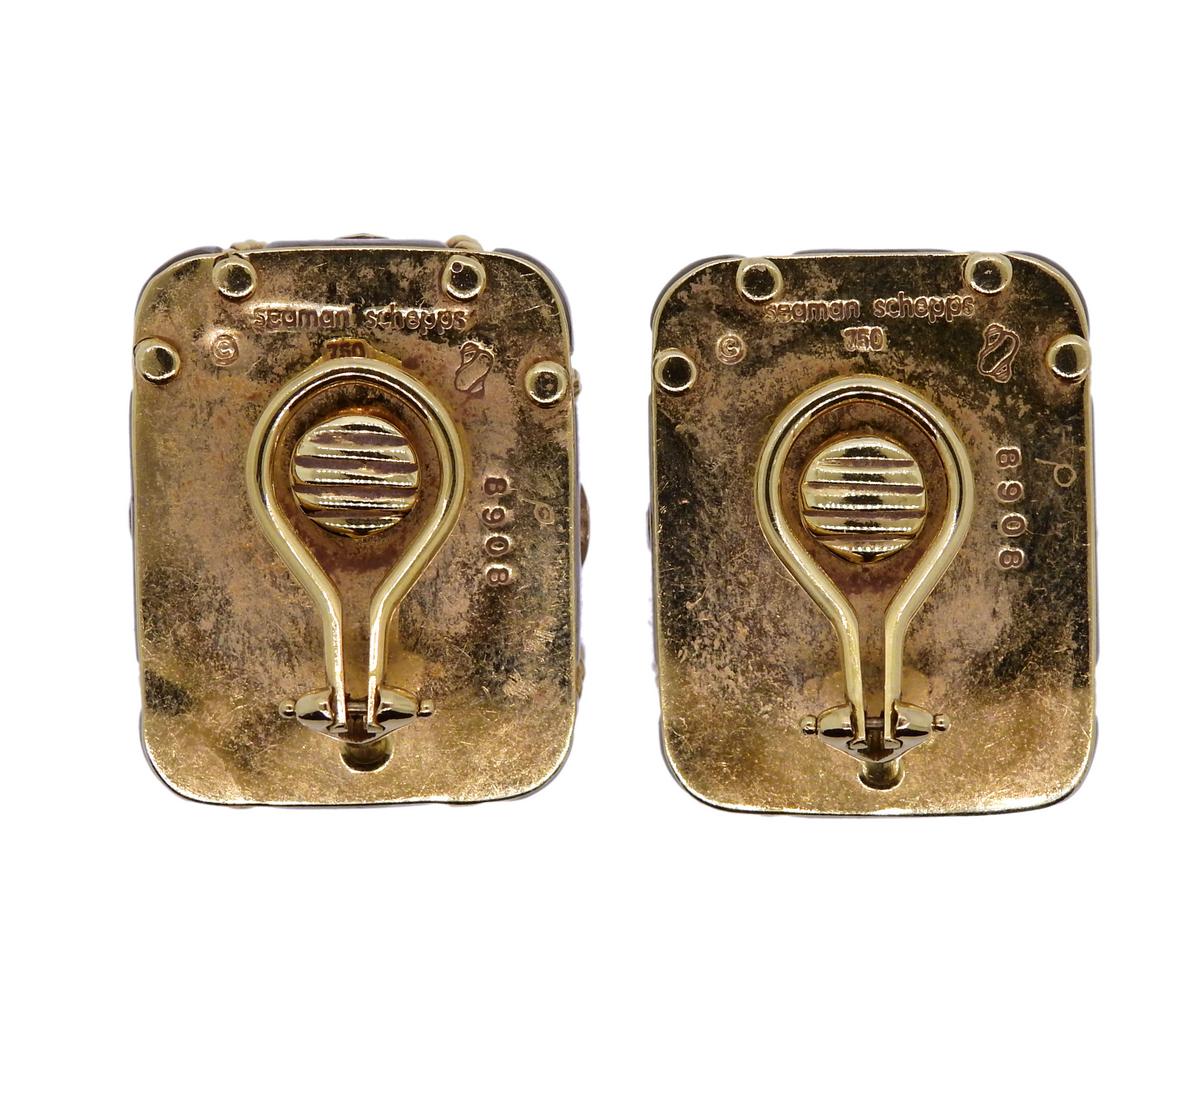 Pair of 18k gold earrings, crafted by Seaman Schepps for Cage collection, set with crystal and citrines. Come with box.  Earrings are 25mm x 20mm and weigh 33.6 grams. Marked 750, 8908, Seaman Schepps, Shell hallmark.